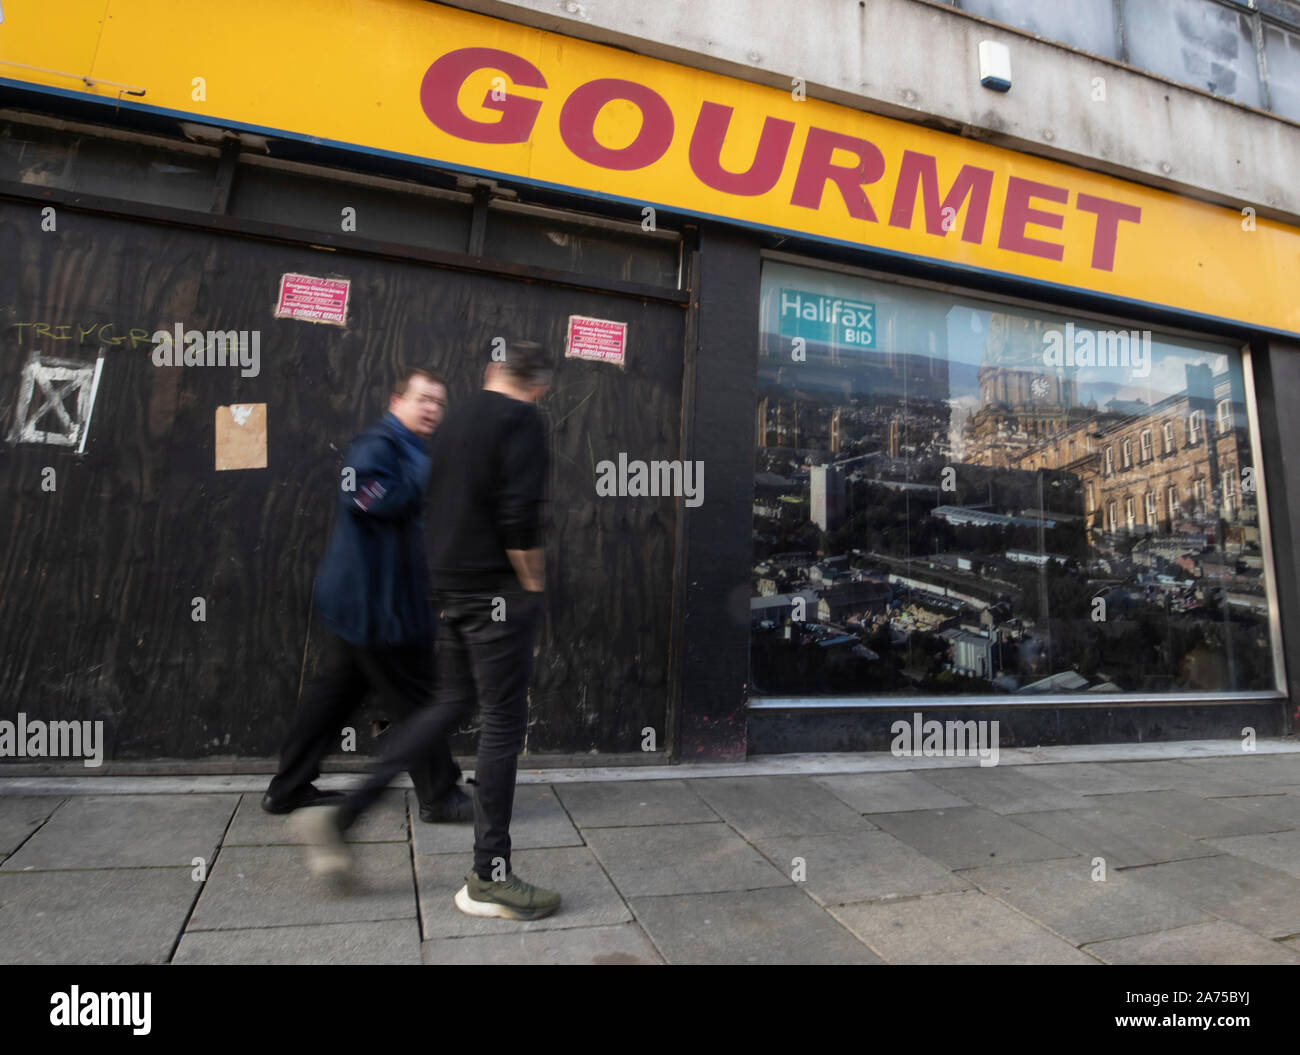 Men walk past a closed shop in Halifax in Yorkshire, as a think tank says the Conservatives will have to target traditional Labour voters from regional towns in order to win the general election. PA Photo. Picture date: Wednesday October 30, 2019. The Conservatives will have to target traditional Labour voters from regional towns such as Workington in order to win the Christmas general election, according to a think tank. The group urged the party to target towns including Halifax, Warrington, Wigan and Workington in order to gain these key regional seats. Photo credit should read: Danny Lawso Stock Photo